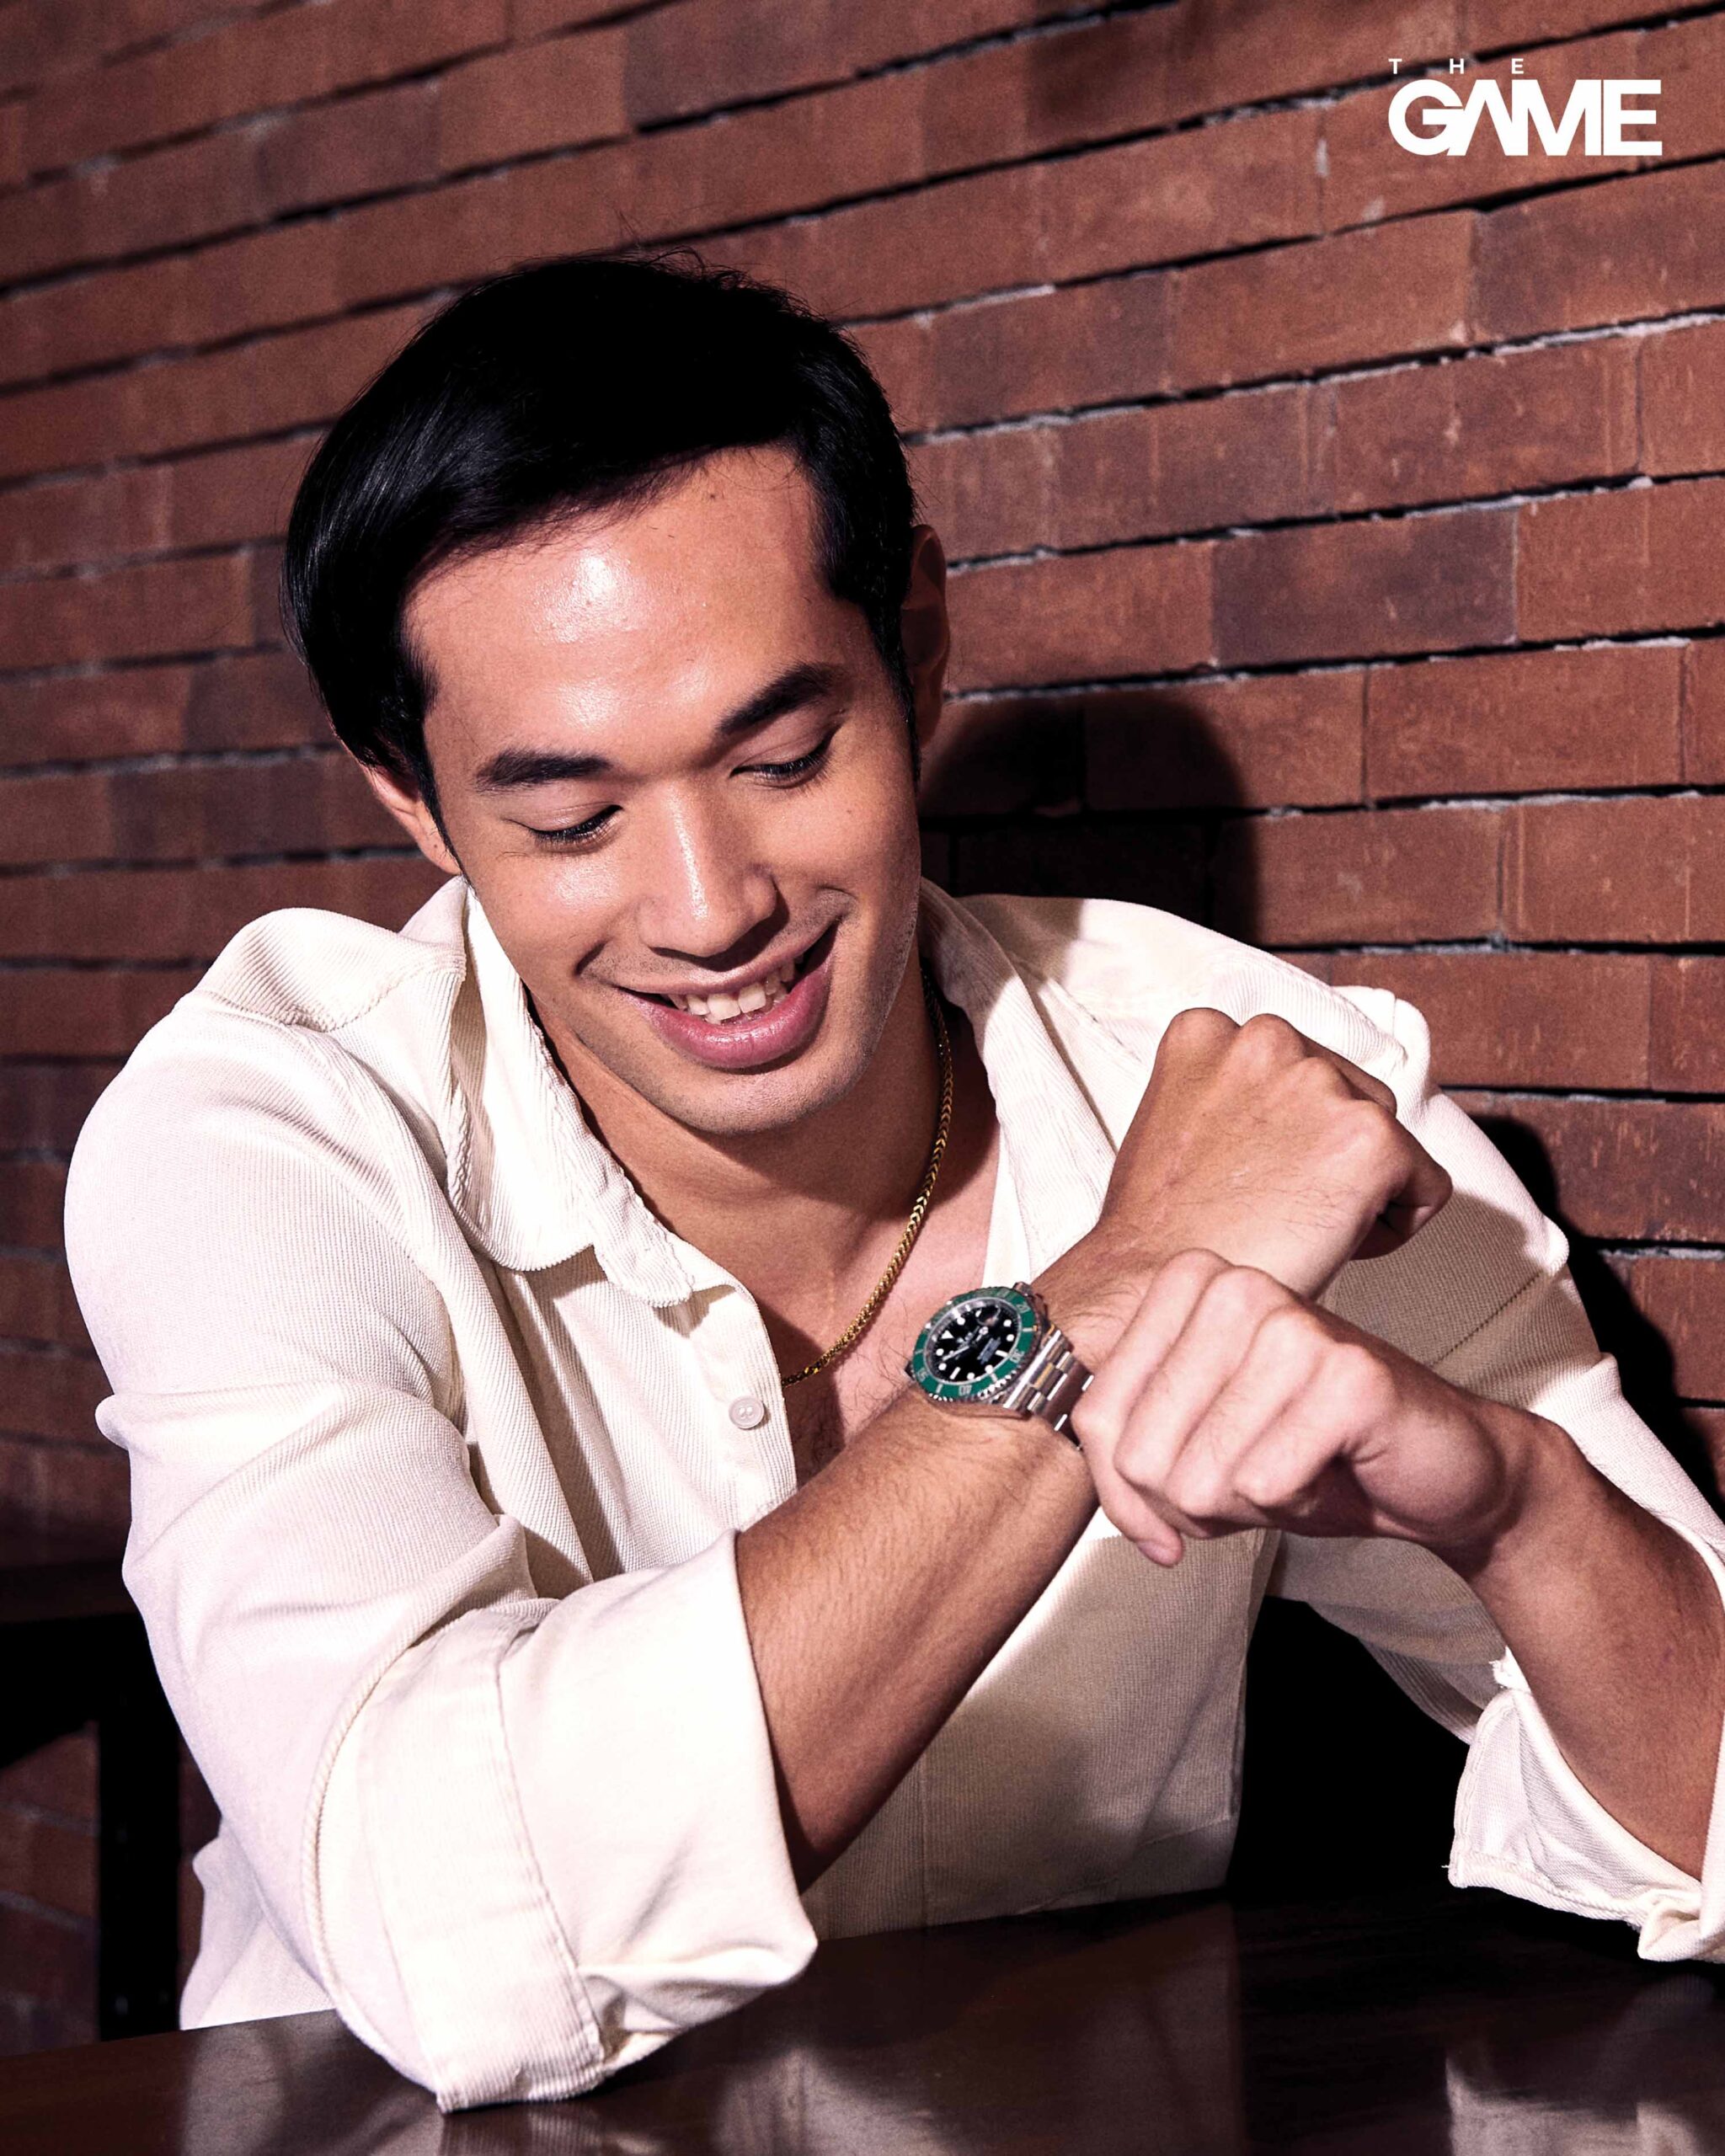 TJ Simtoco shows The GAME his watch collection